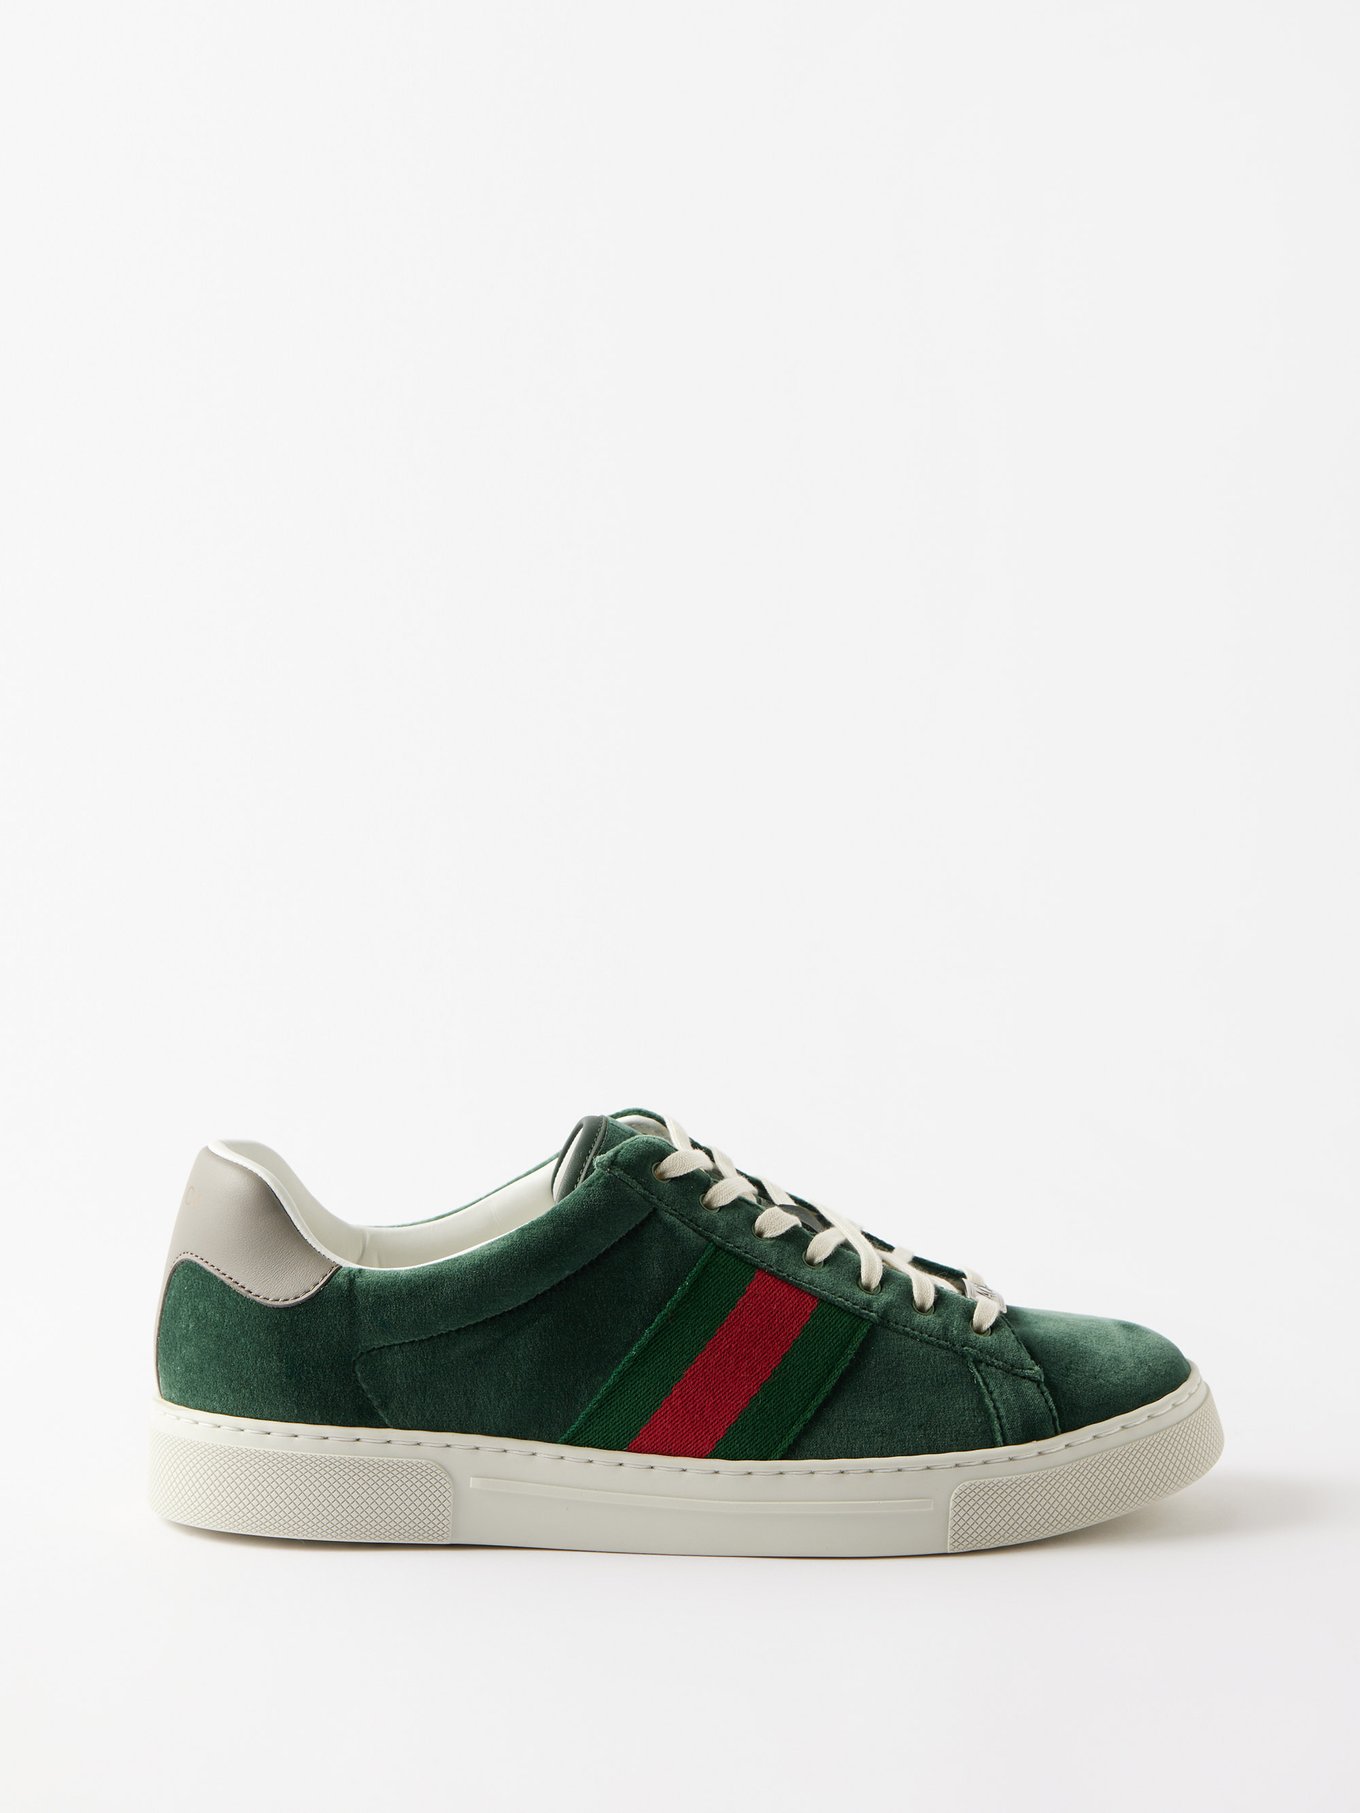 Gucci Ace Logo Sneakers